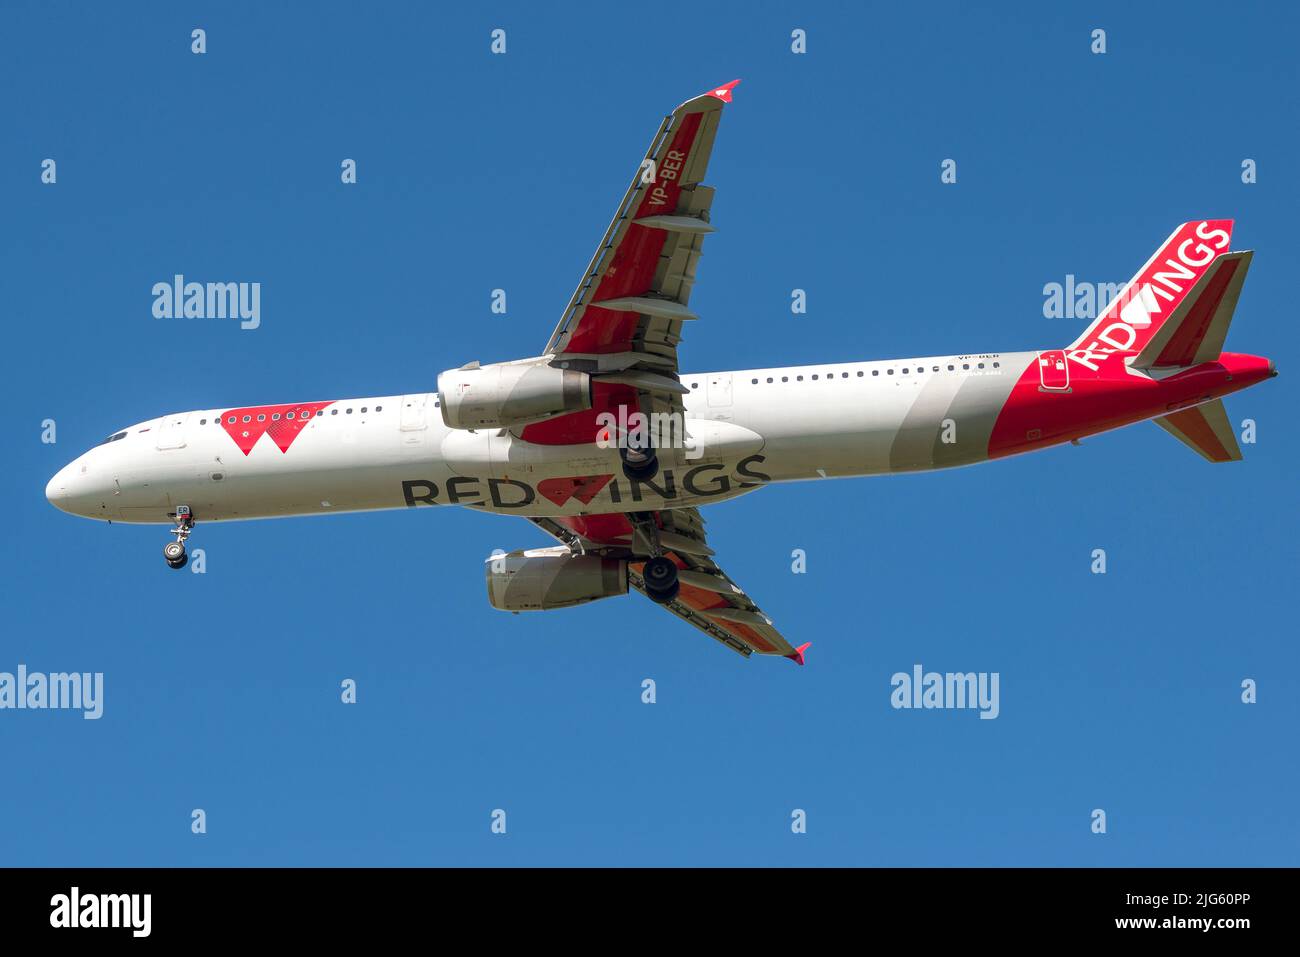 SAINT PETERSBURG, RUSSIA - AUGUST 08, 2020: Aircraft Airbus A321-200 (VP-BER) of Red Wings airline on glide path in cloudless blue sky. Bottom view Stock Photo